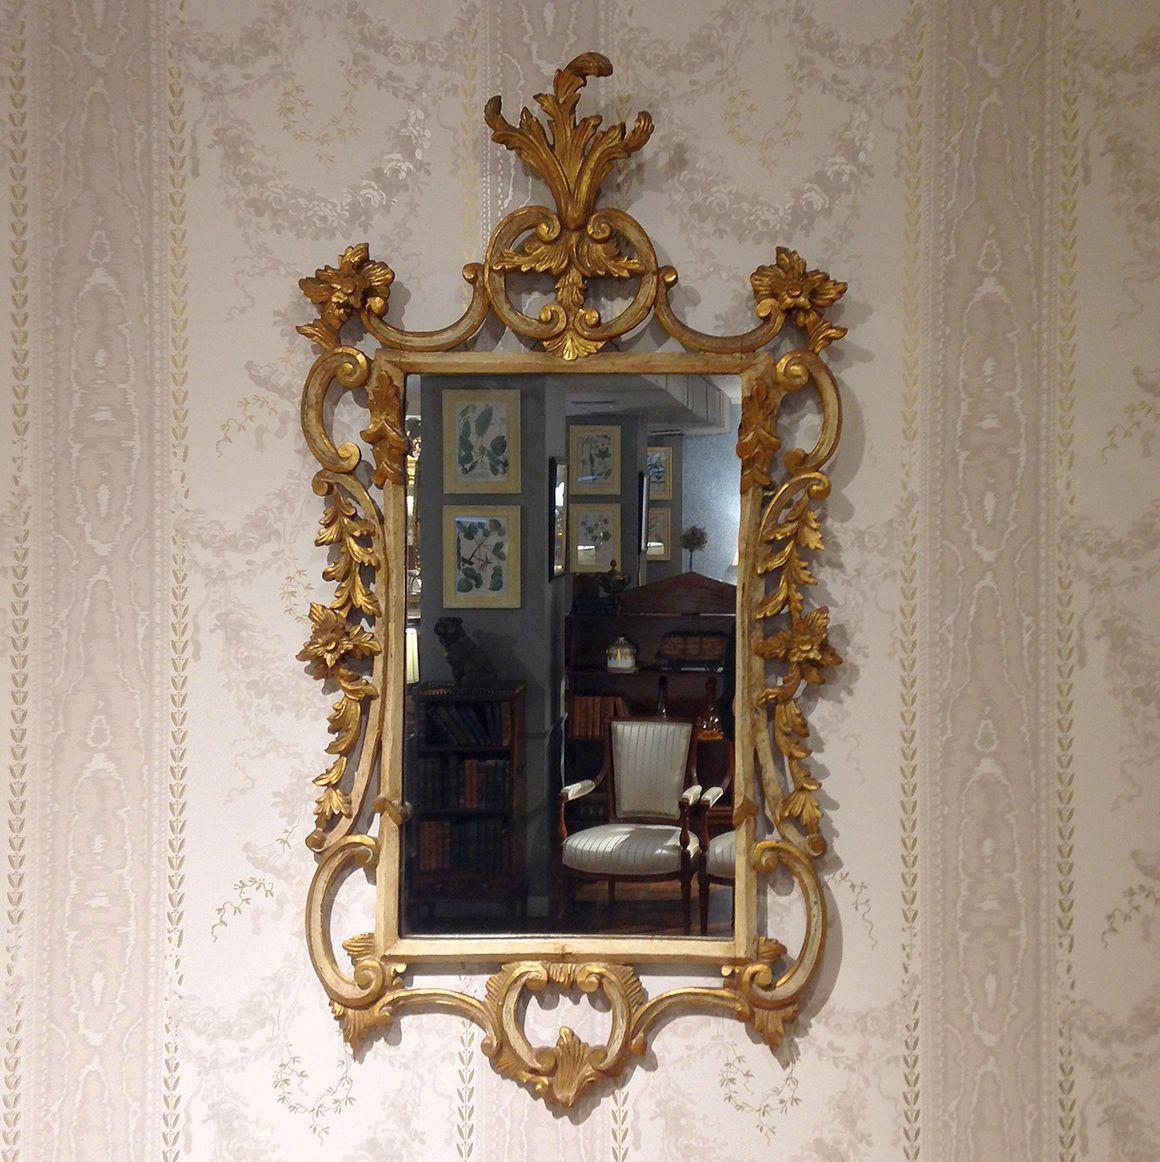 This exquisite George III gilt and painted rococo mirror is ornamented throughout with finely carved C-scrolls, acanthus leaves, and flowers.